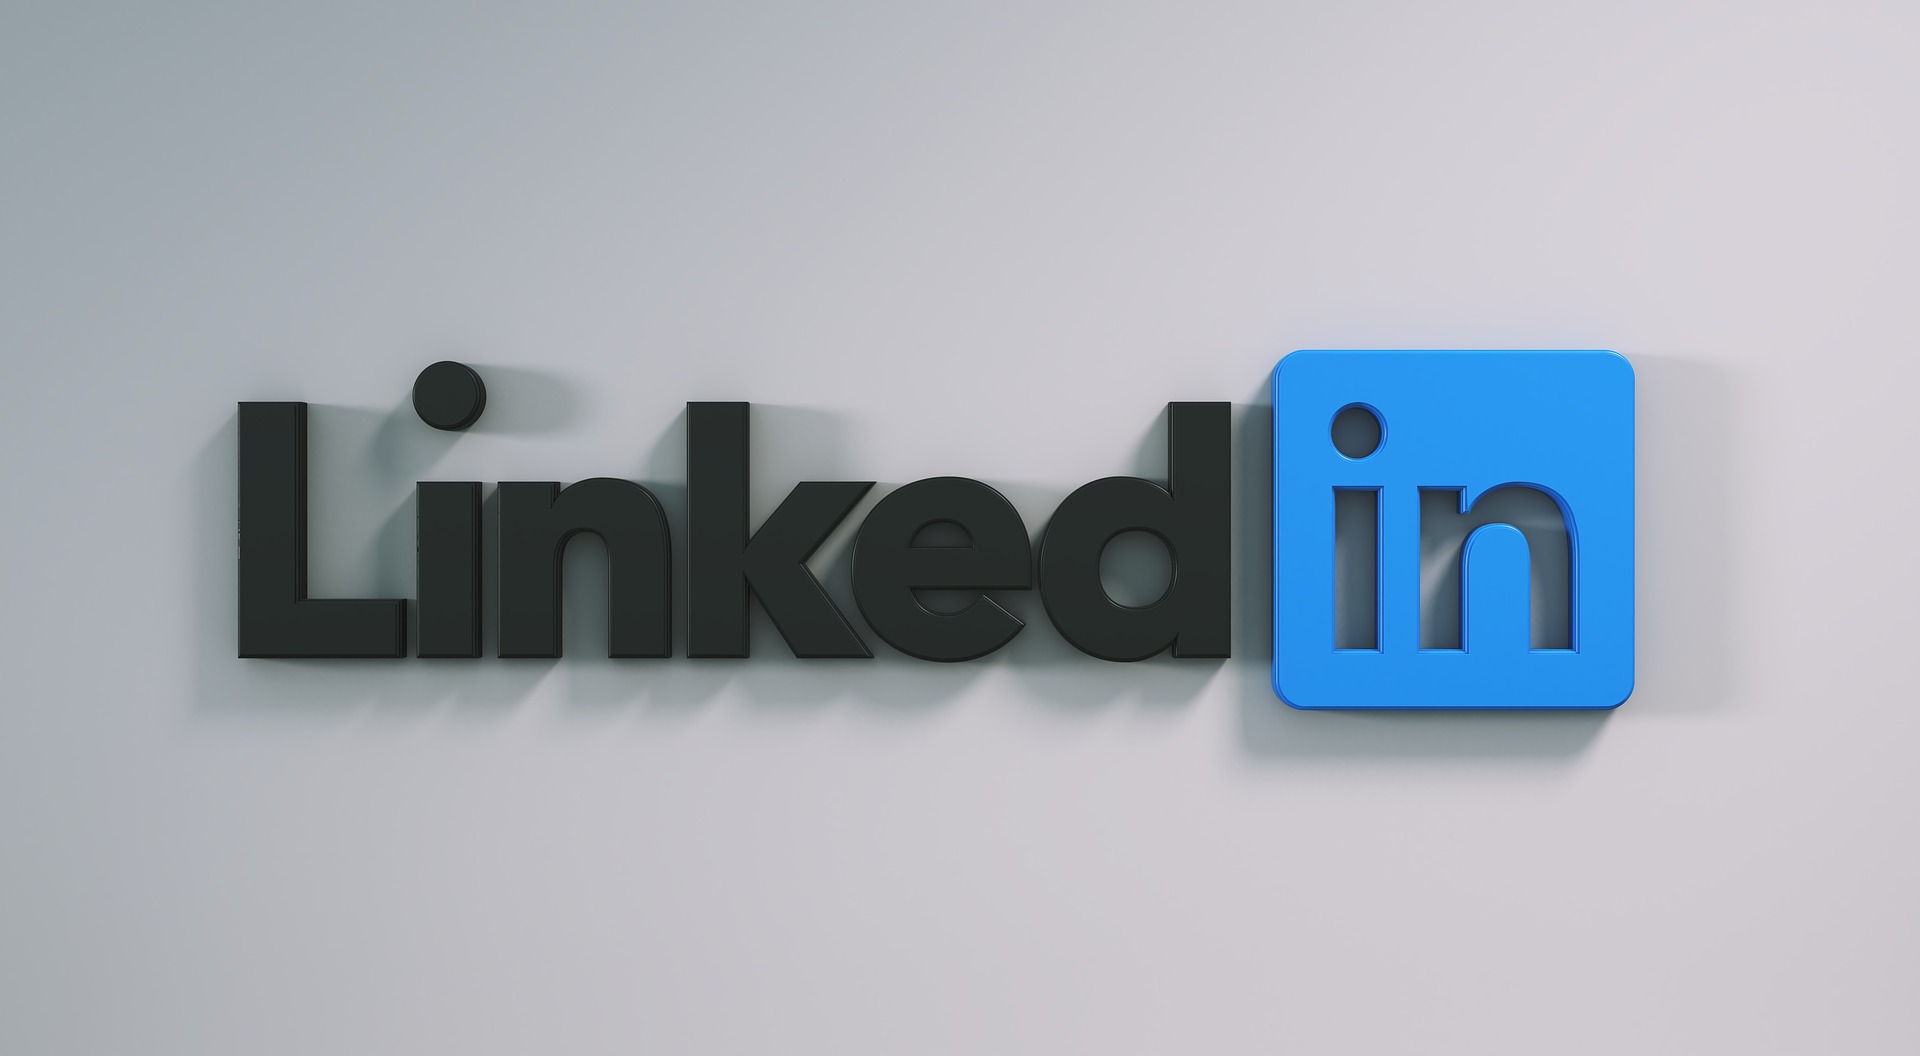 How to find and edit your LinkedIn URL?